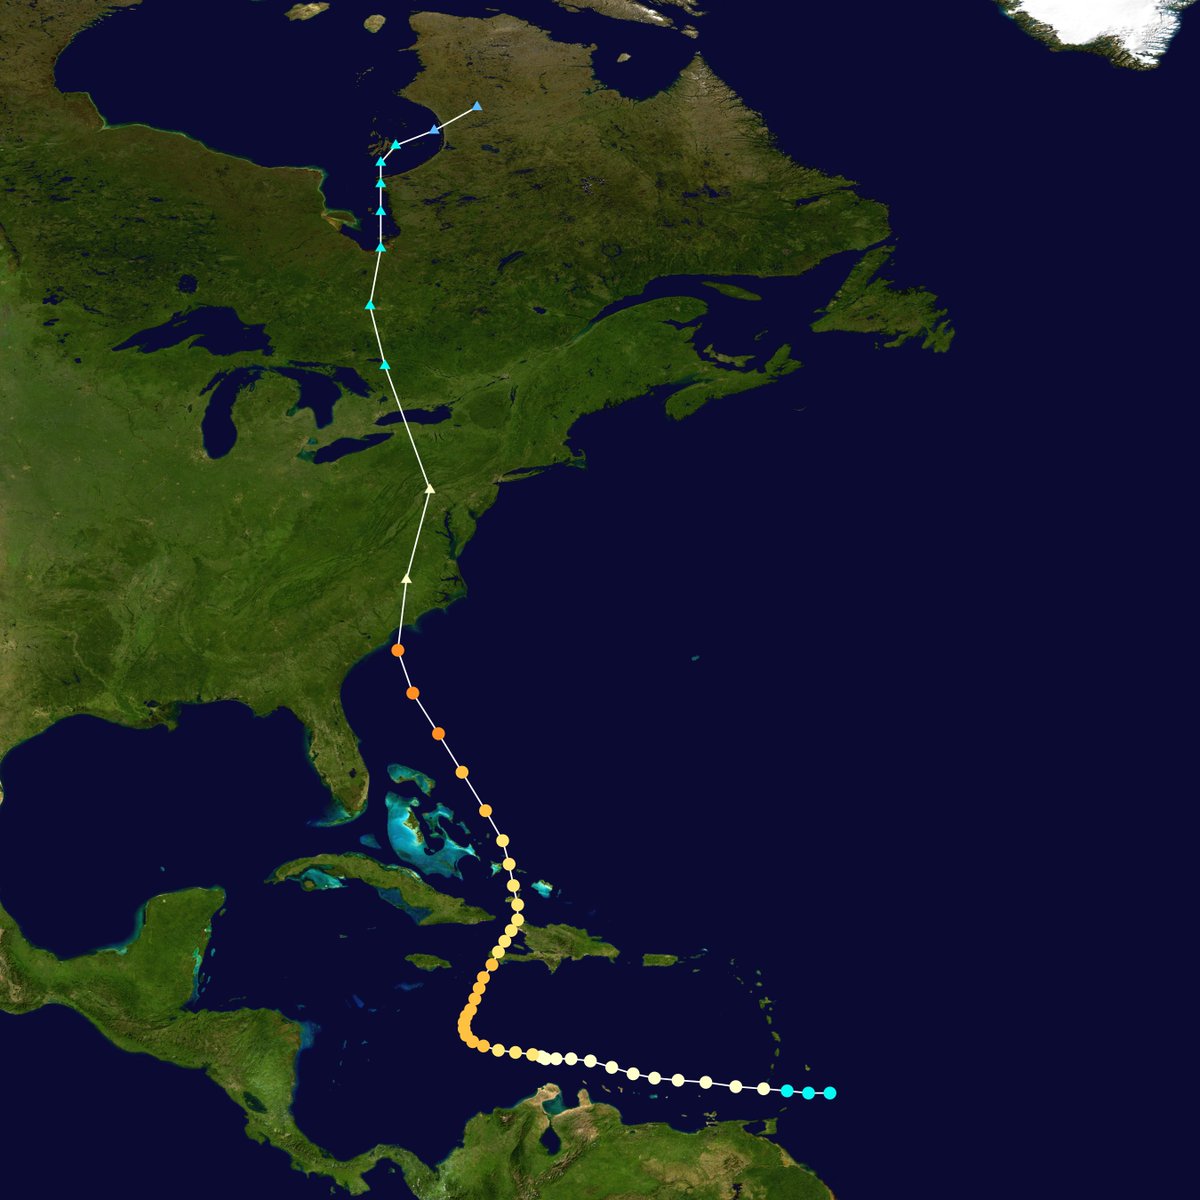 3. They called it Hazel. The hurricane had first been spotted off the coast of South America, and over the course of the week it had been steadily heading north.